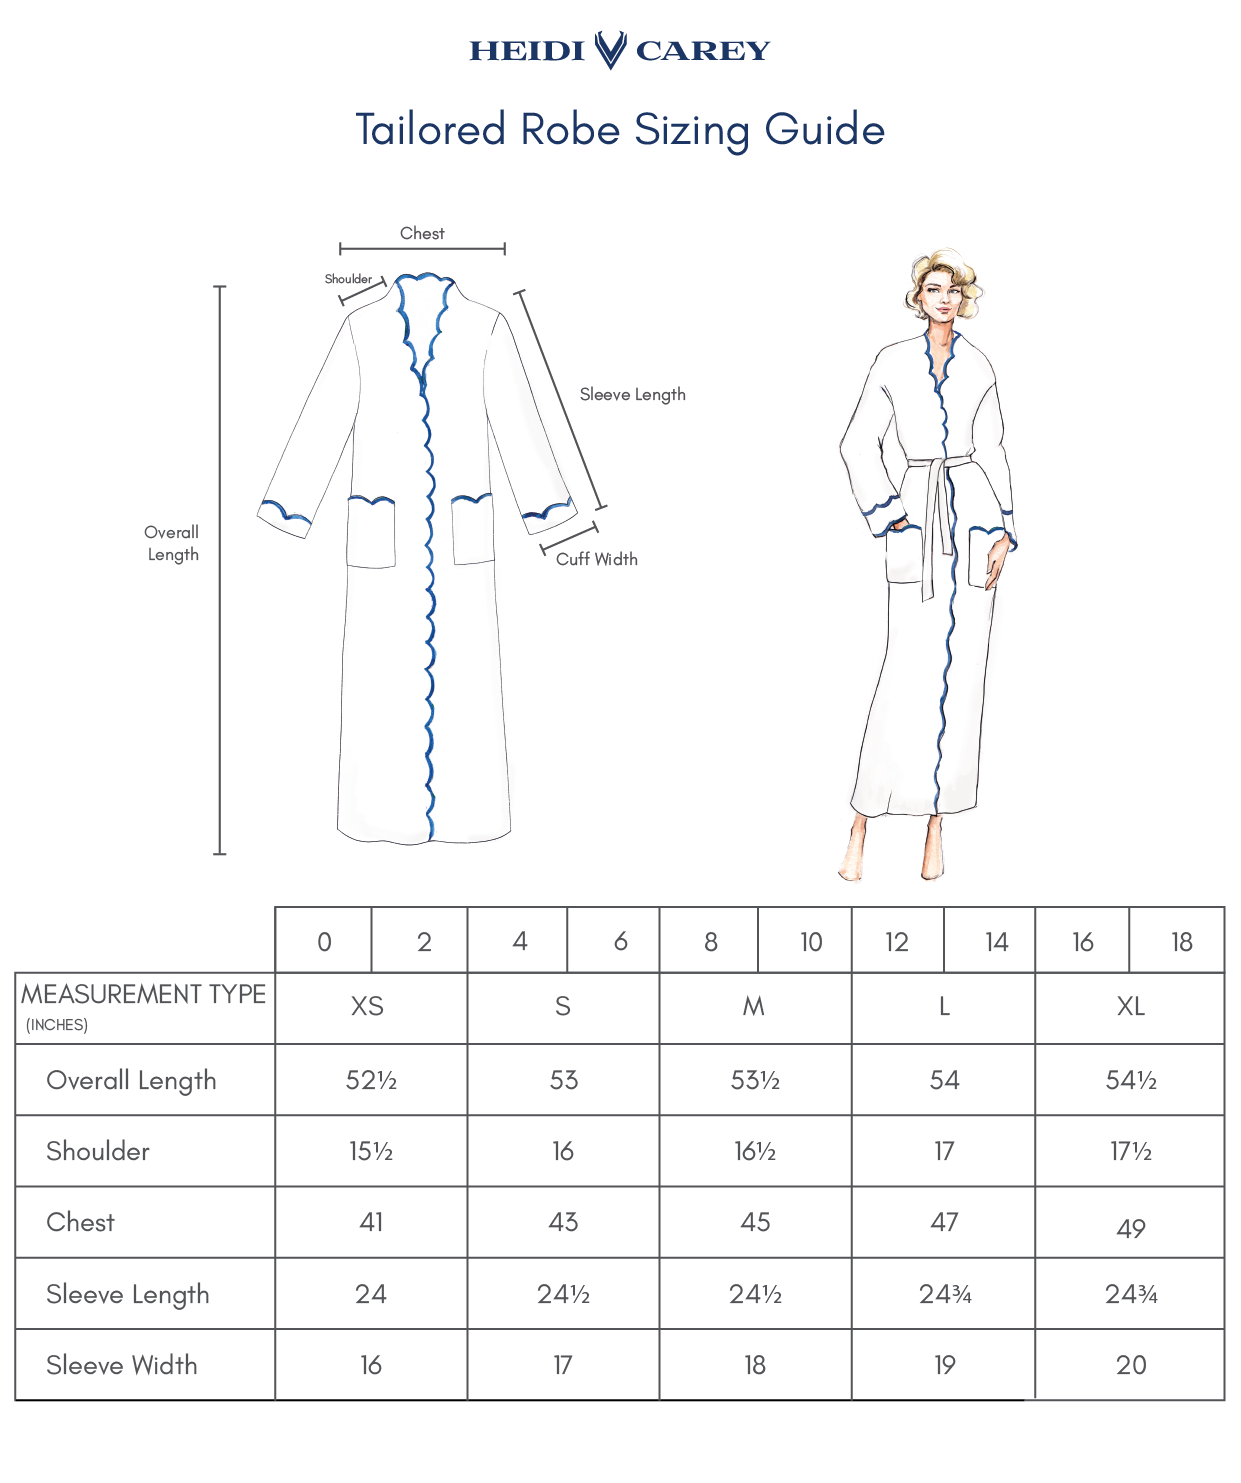 Tailored Robe Sizing Guide